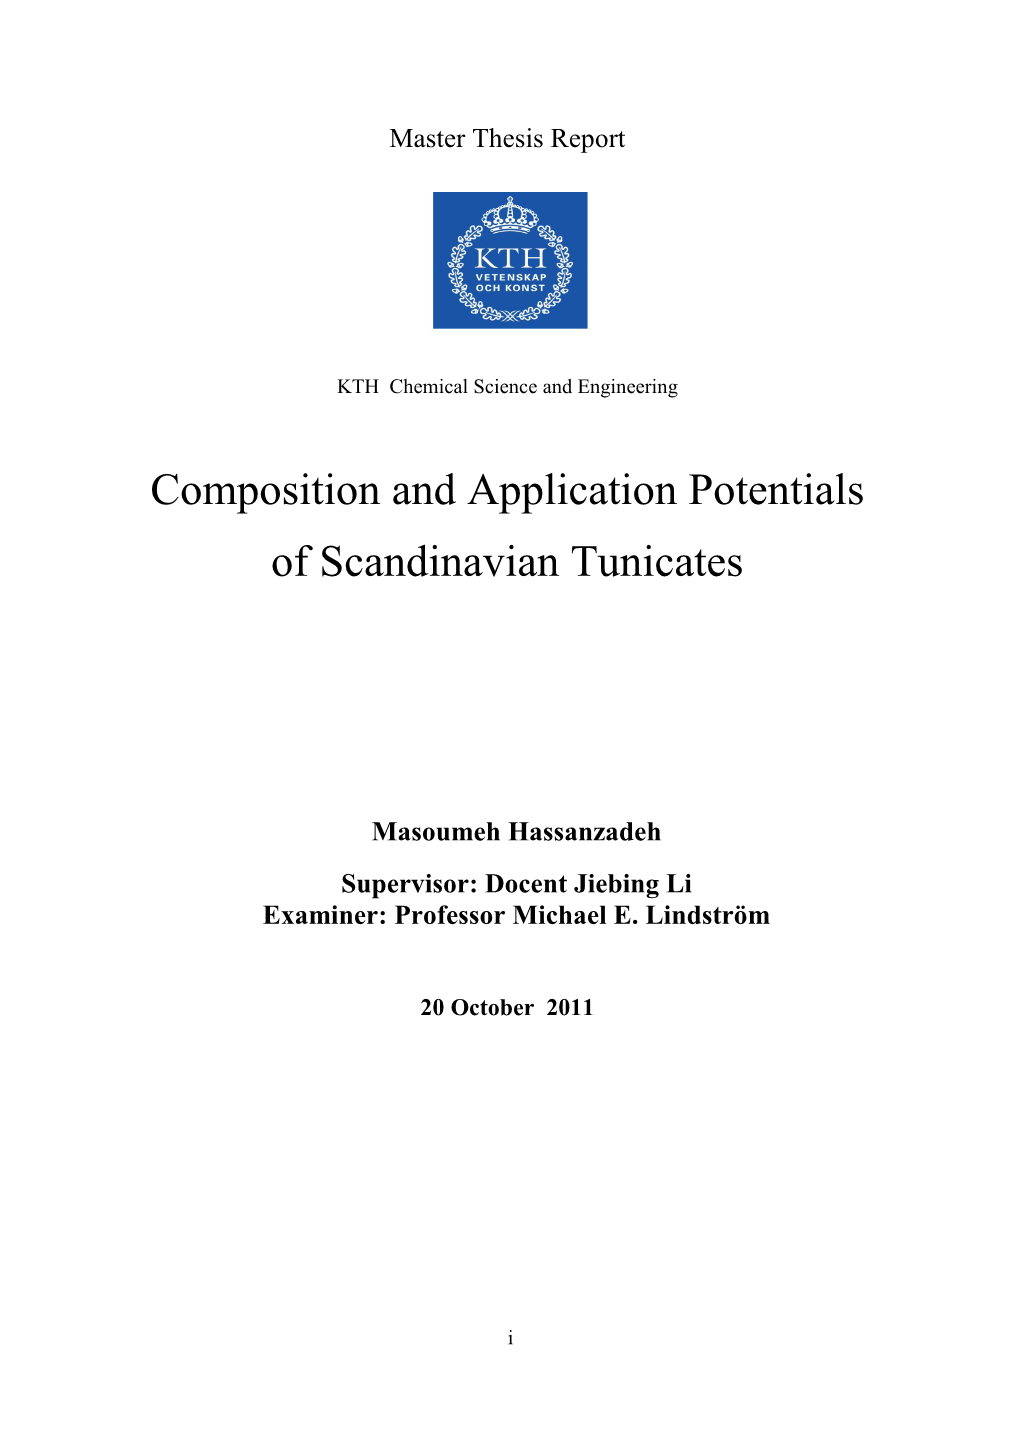 Composition and Application Potentials of Scandinavian Tunicates